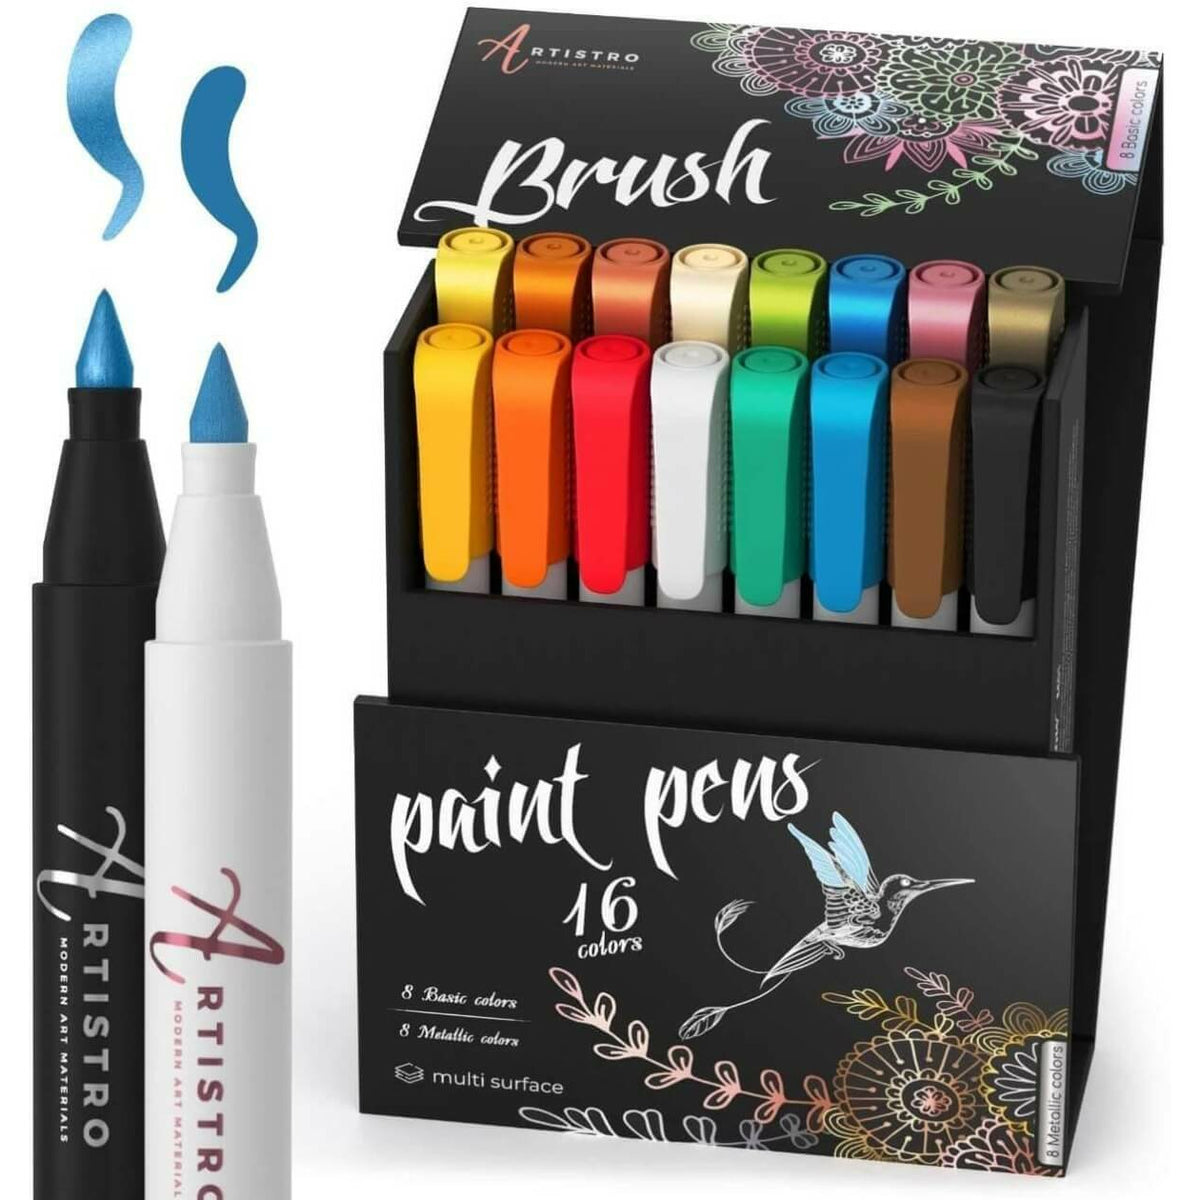 Affordable Brush Pens Review